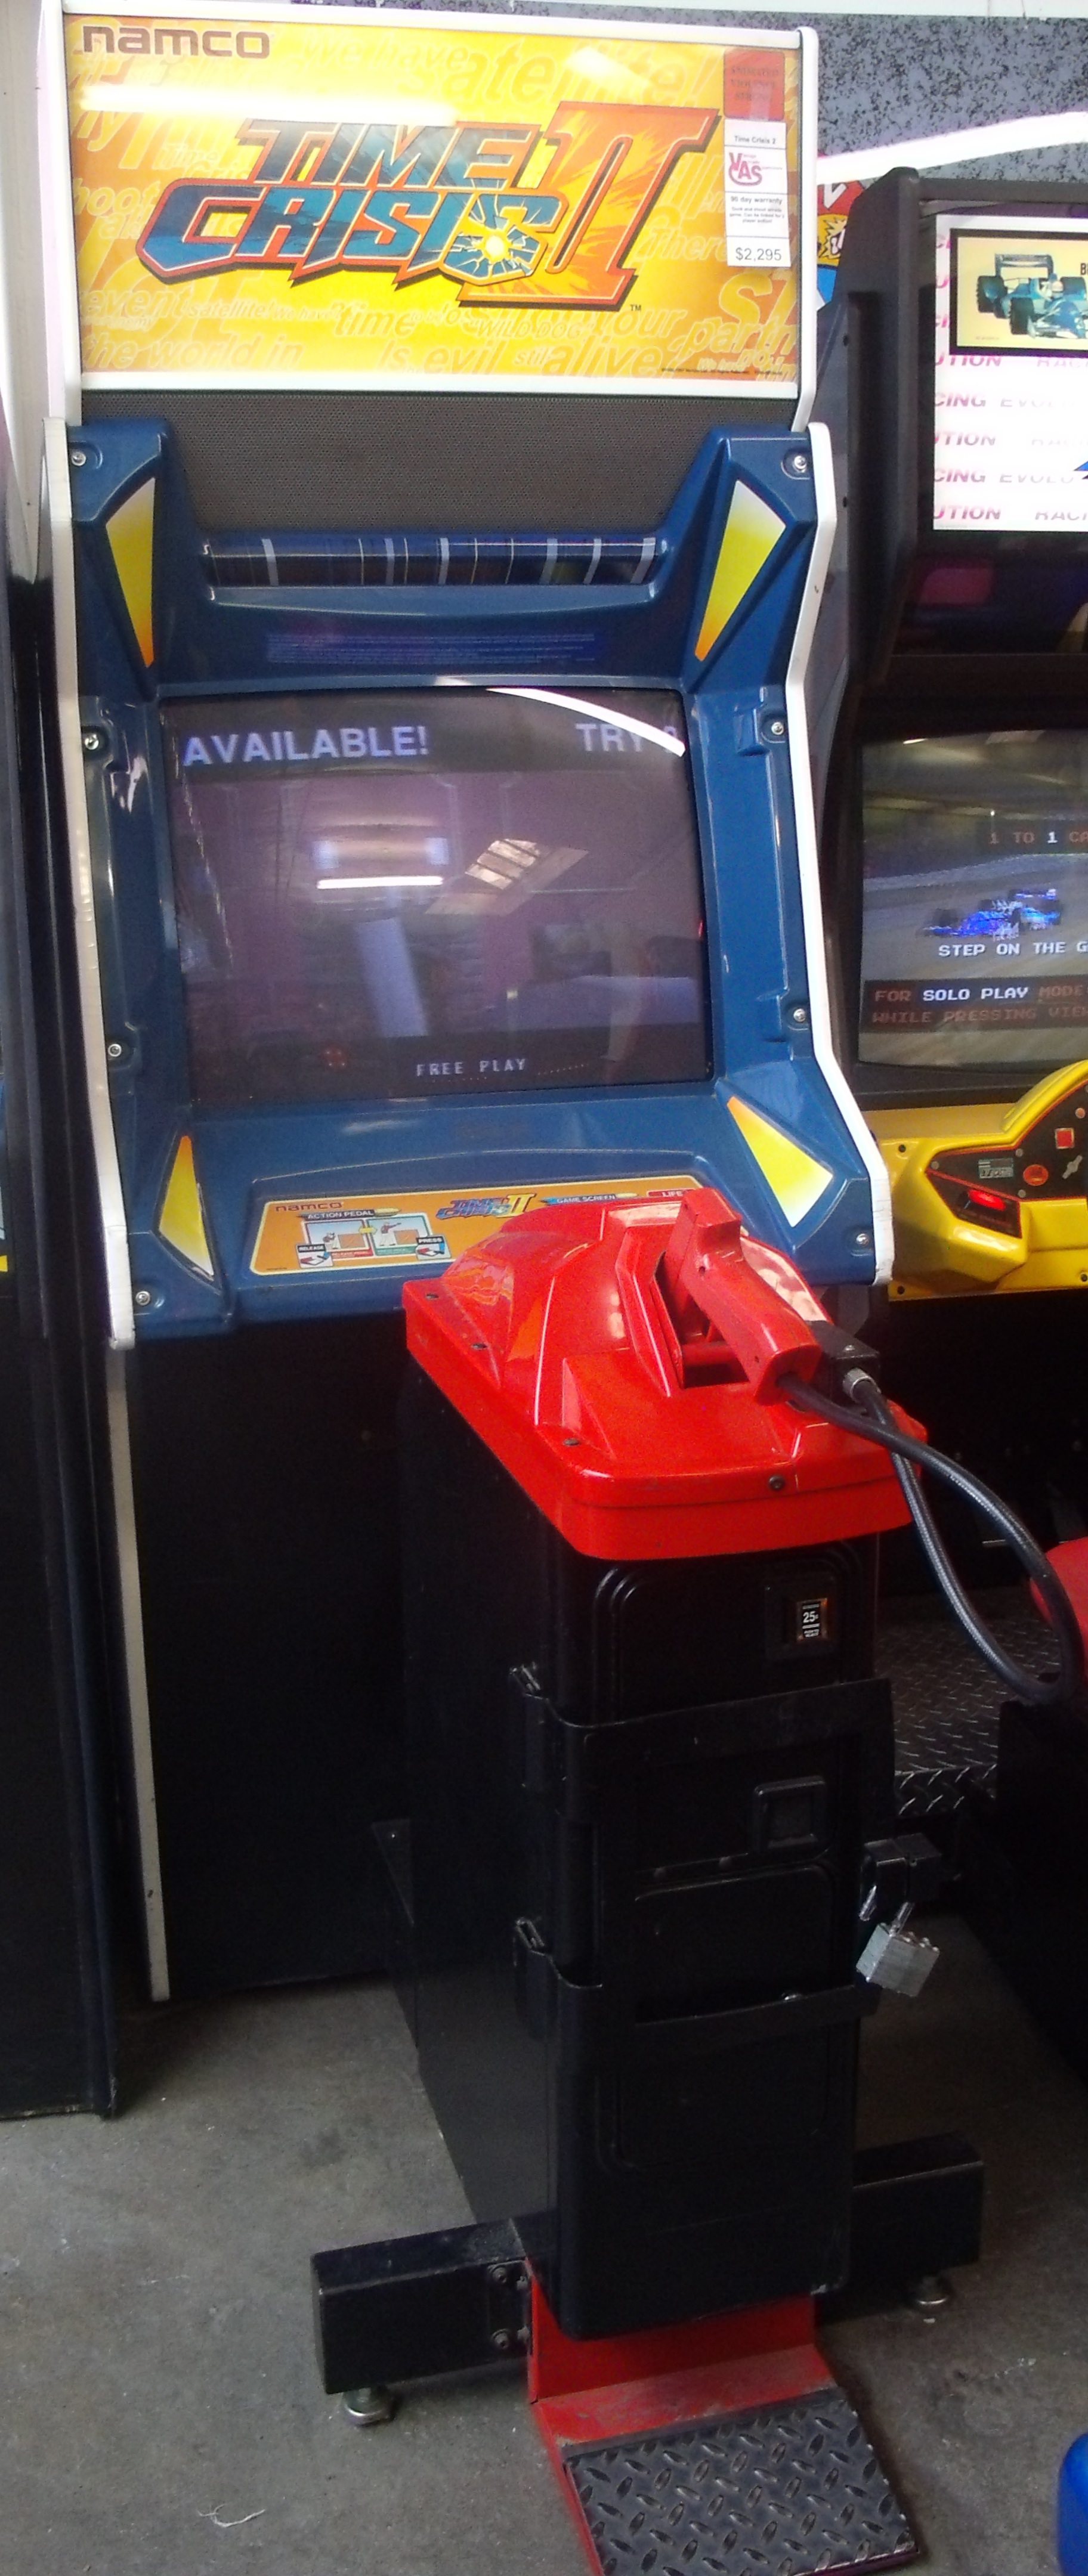 90s arcade game comes back after being in limbo